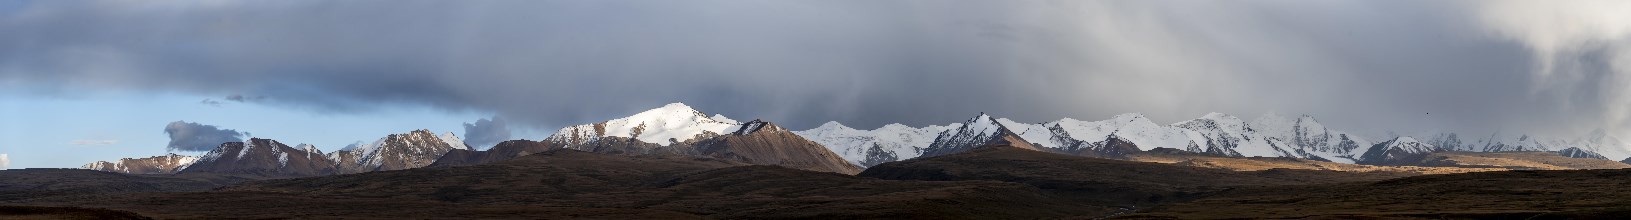 Panorama, Glaciated and snow-capped mountains, dramatic landscape, plateau, autumnal mountain